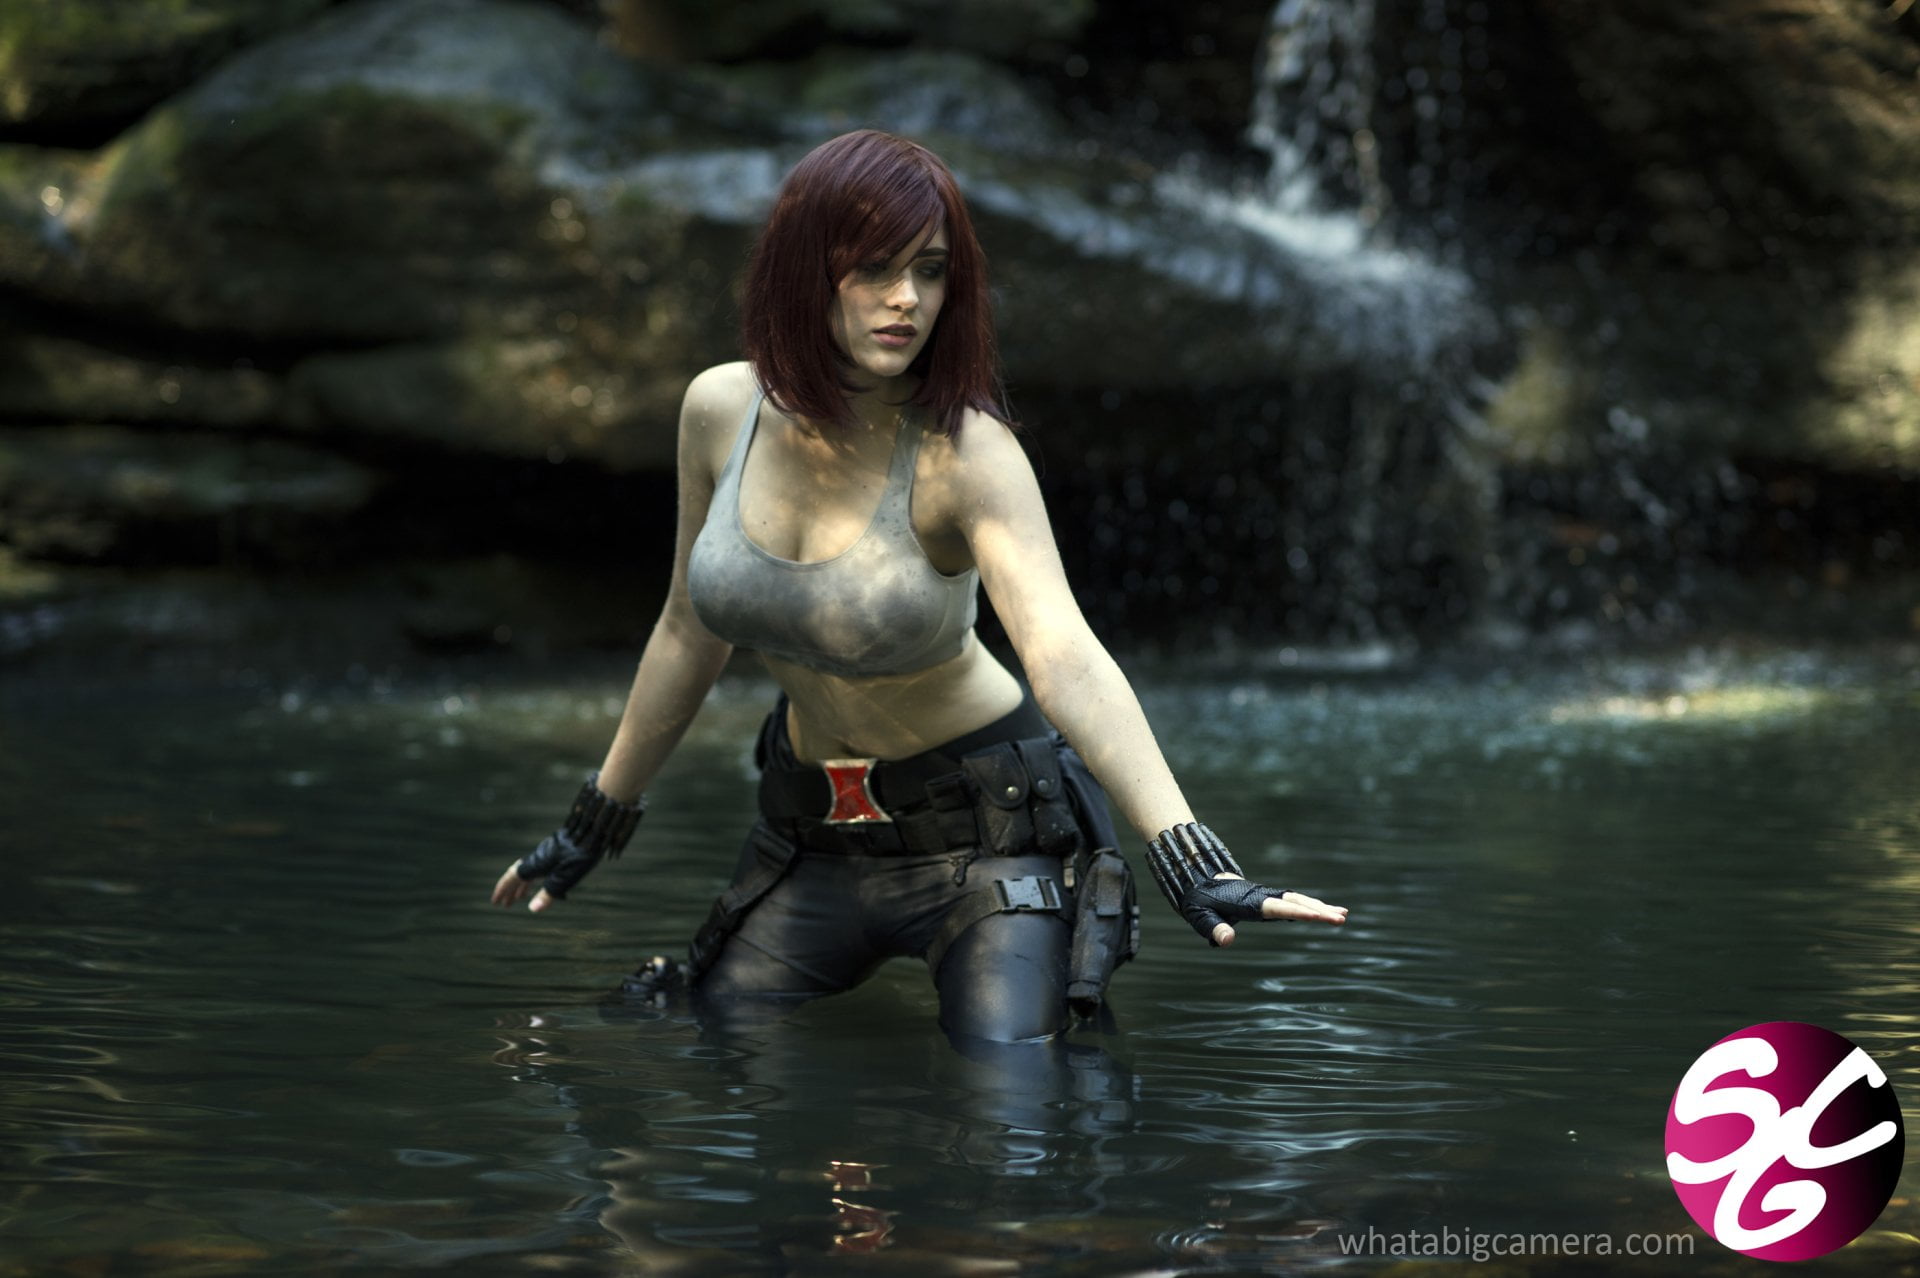 Women, Cosplay, Black Widow, water, lifestyles, one person